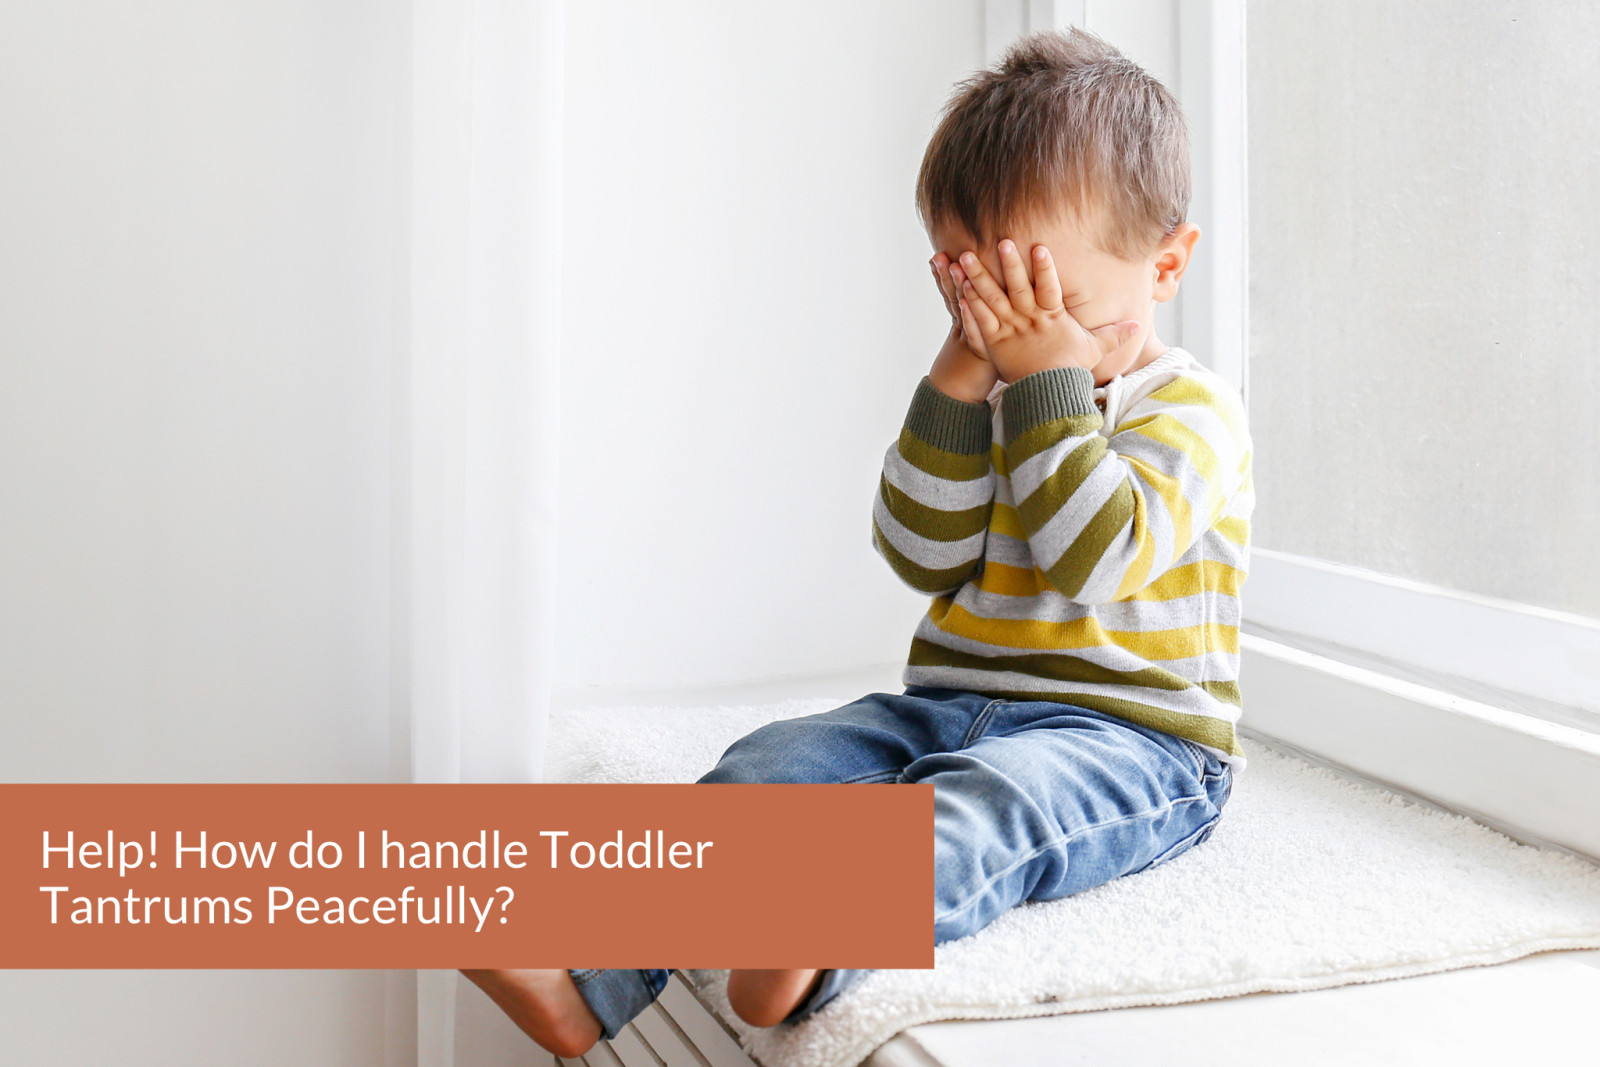 Help! How do I handle toddler tantrums peacefully?